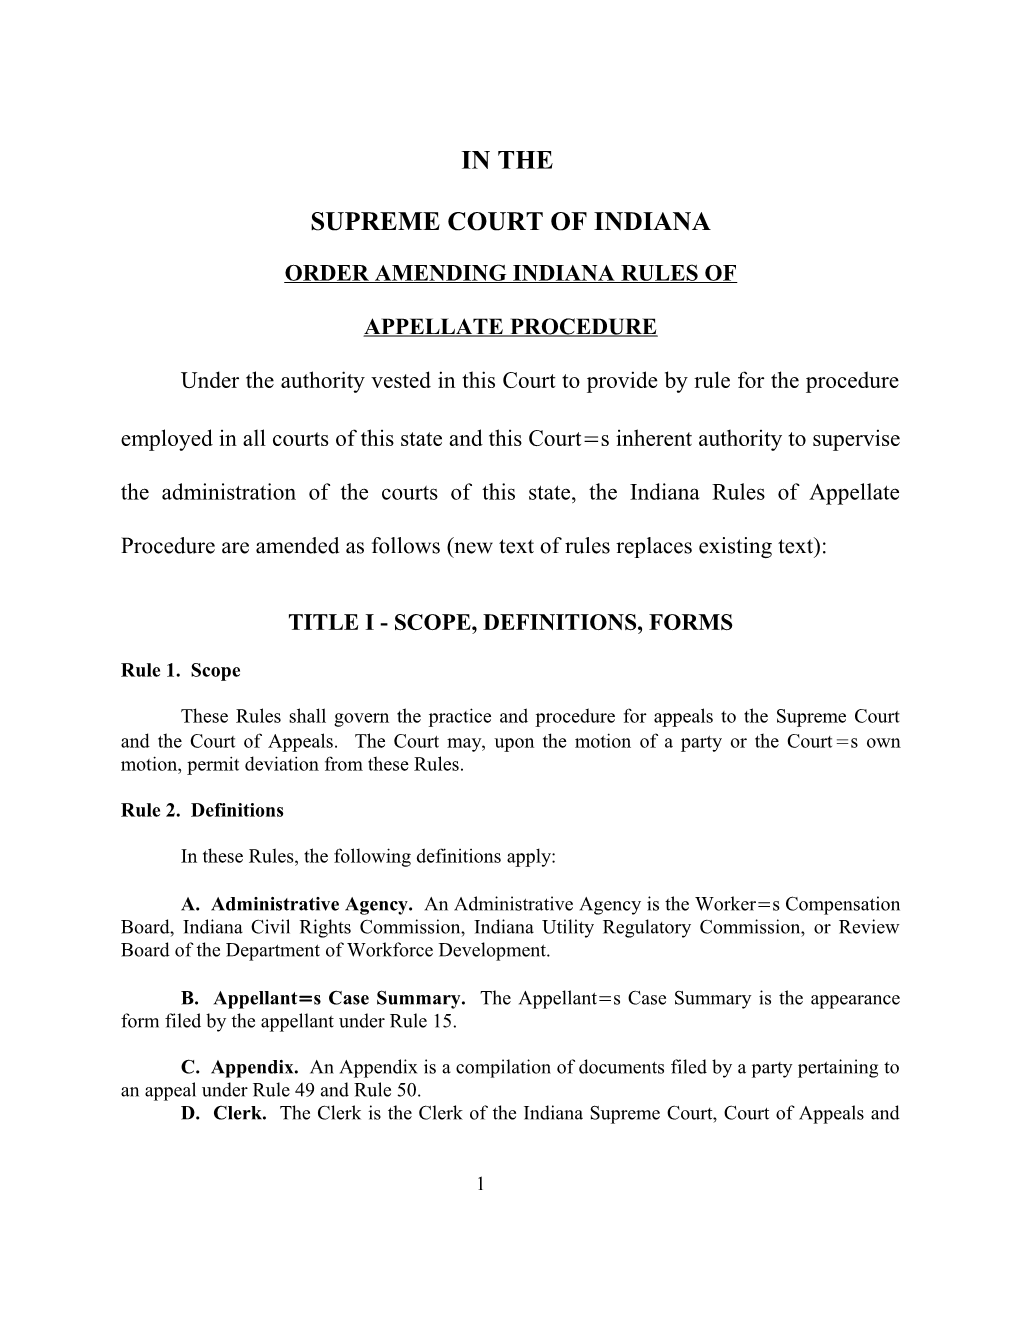 Order Amending Indiana Rules Of